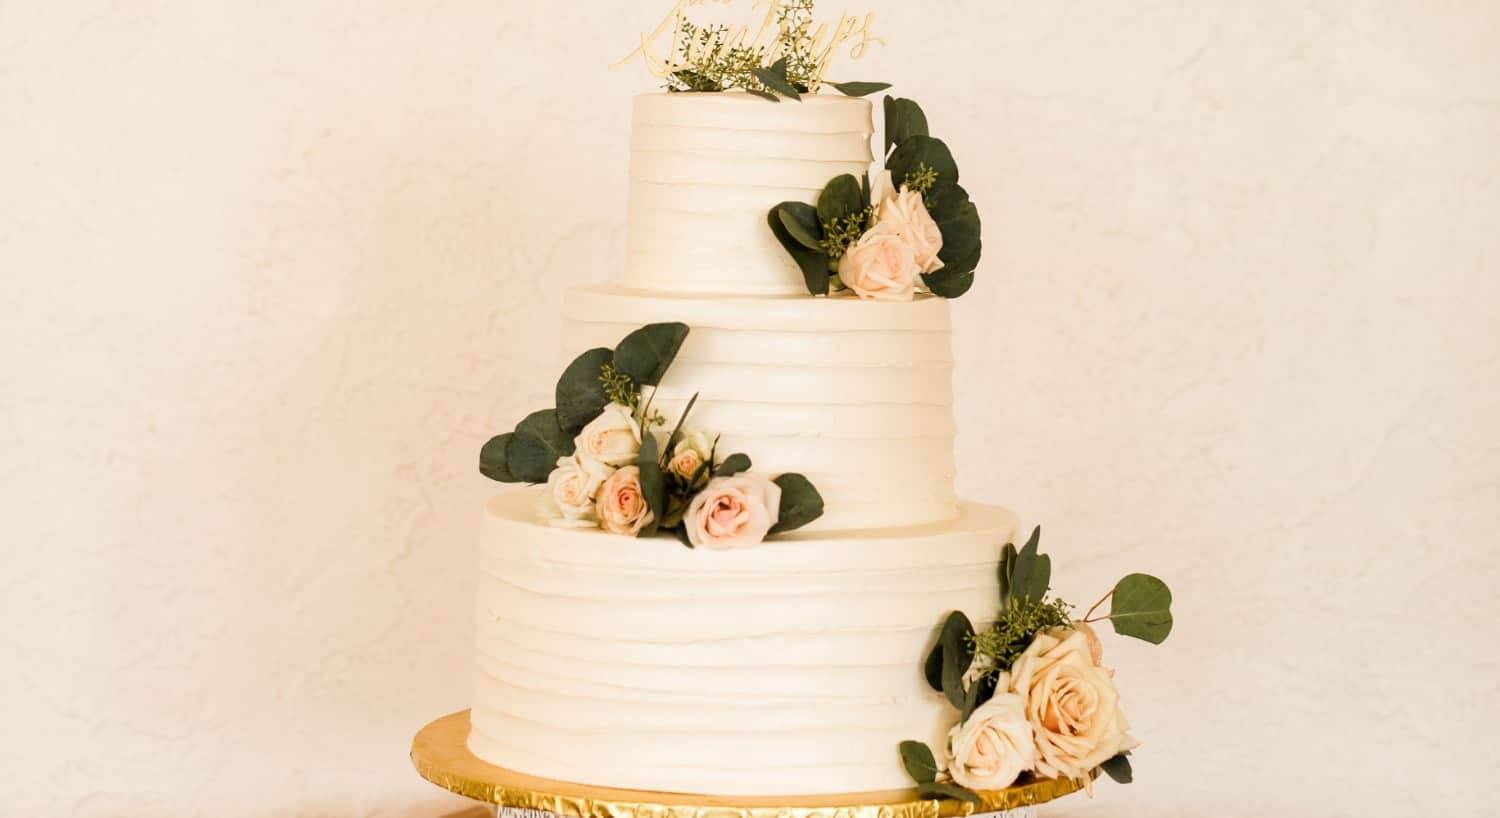 Three tier white cake with white and pink roses as decoration